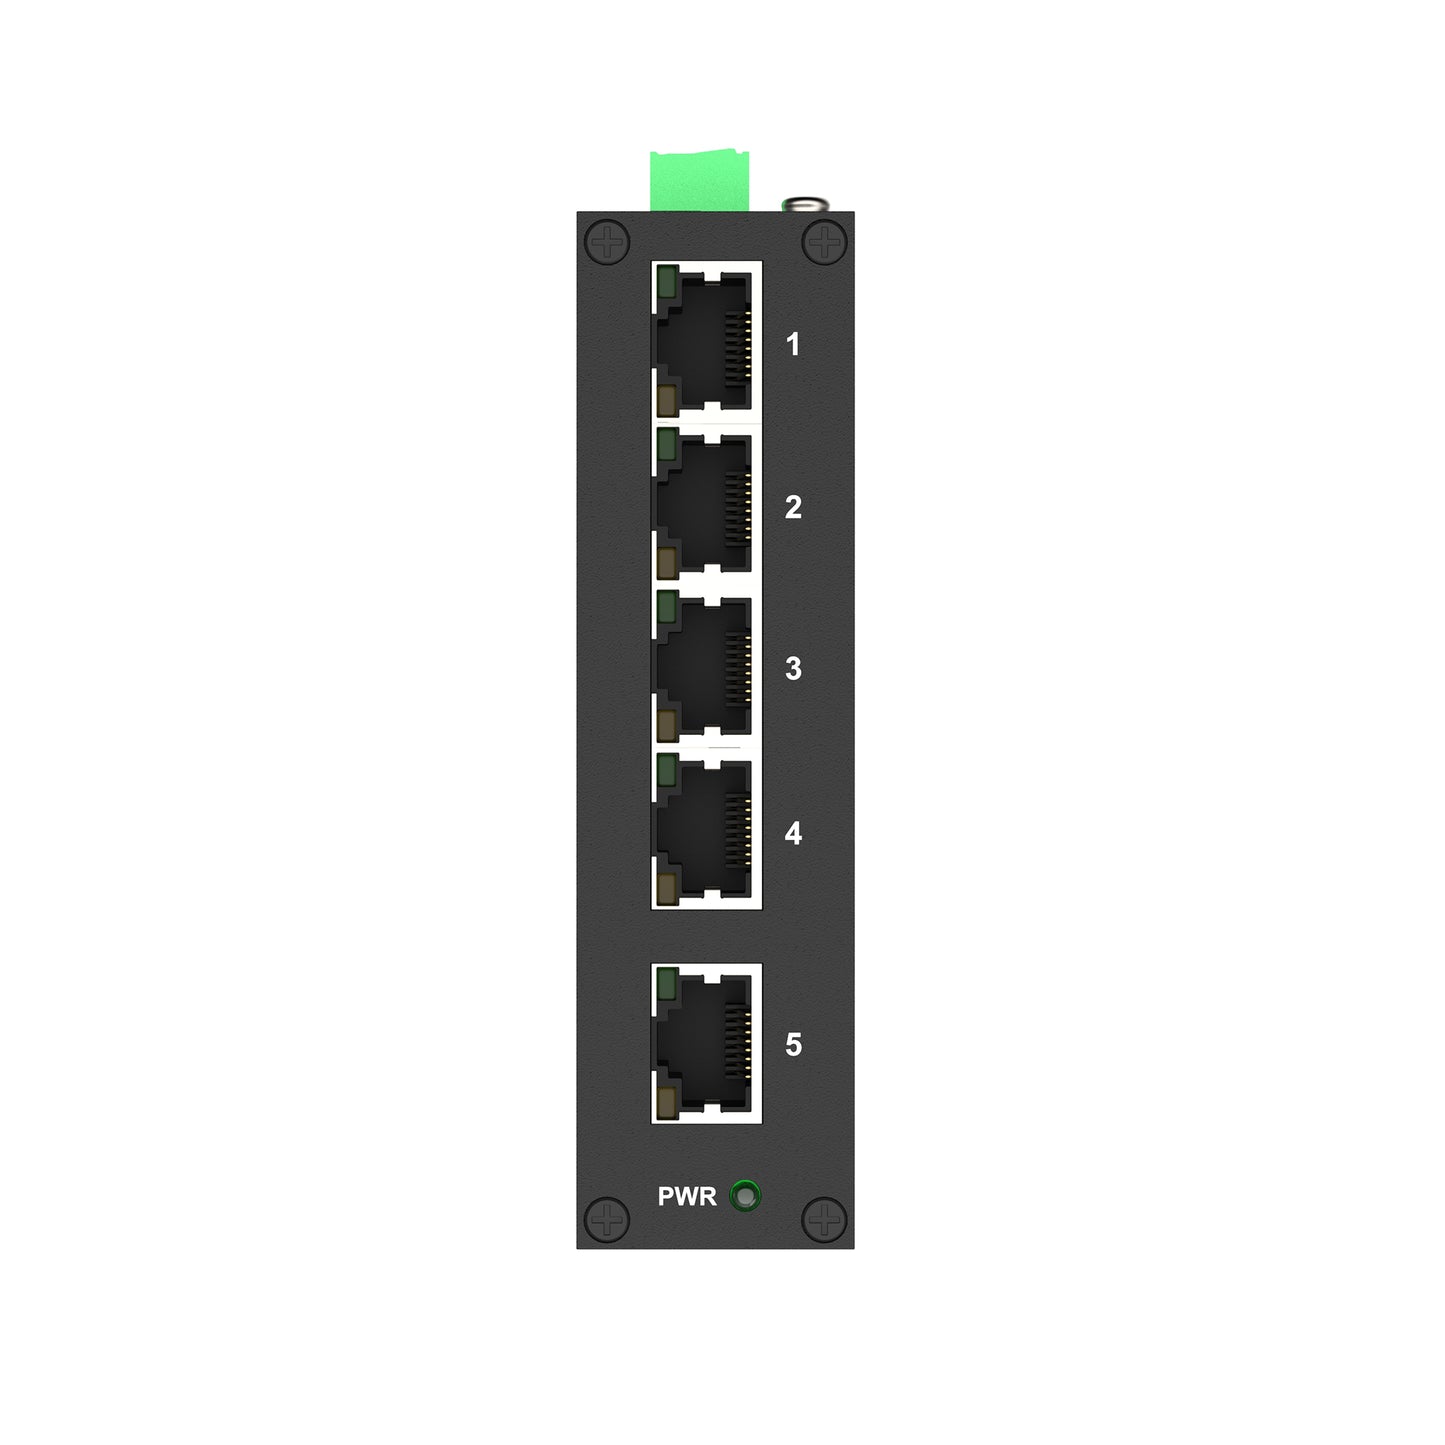 IDS1005R 5FE Din-rail Unmanaged Industrial Ethernet Switch